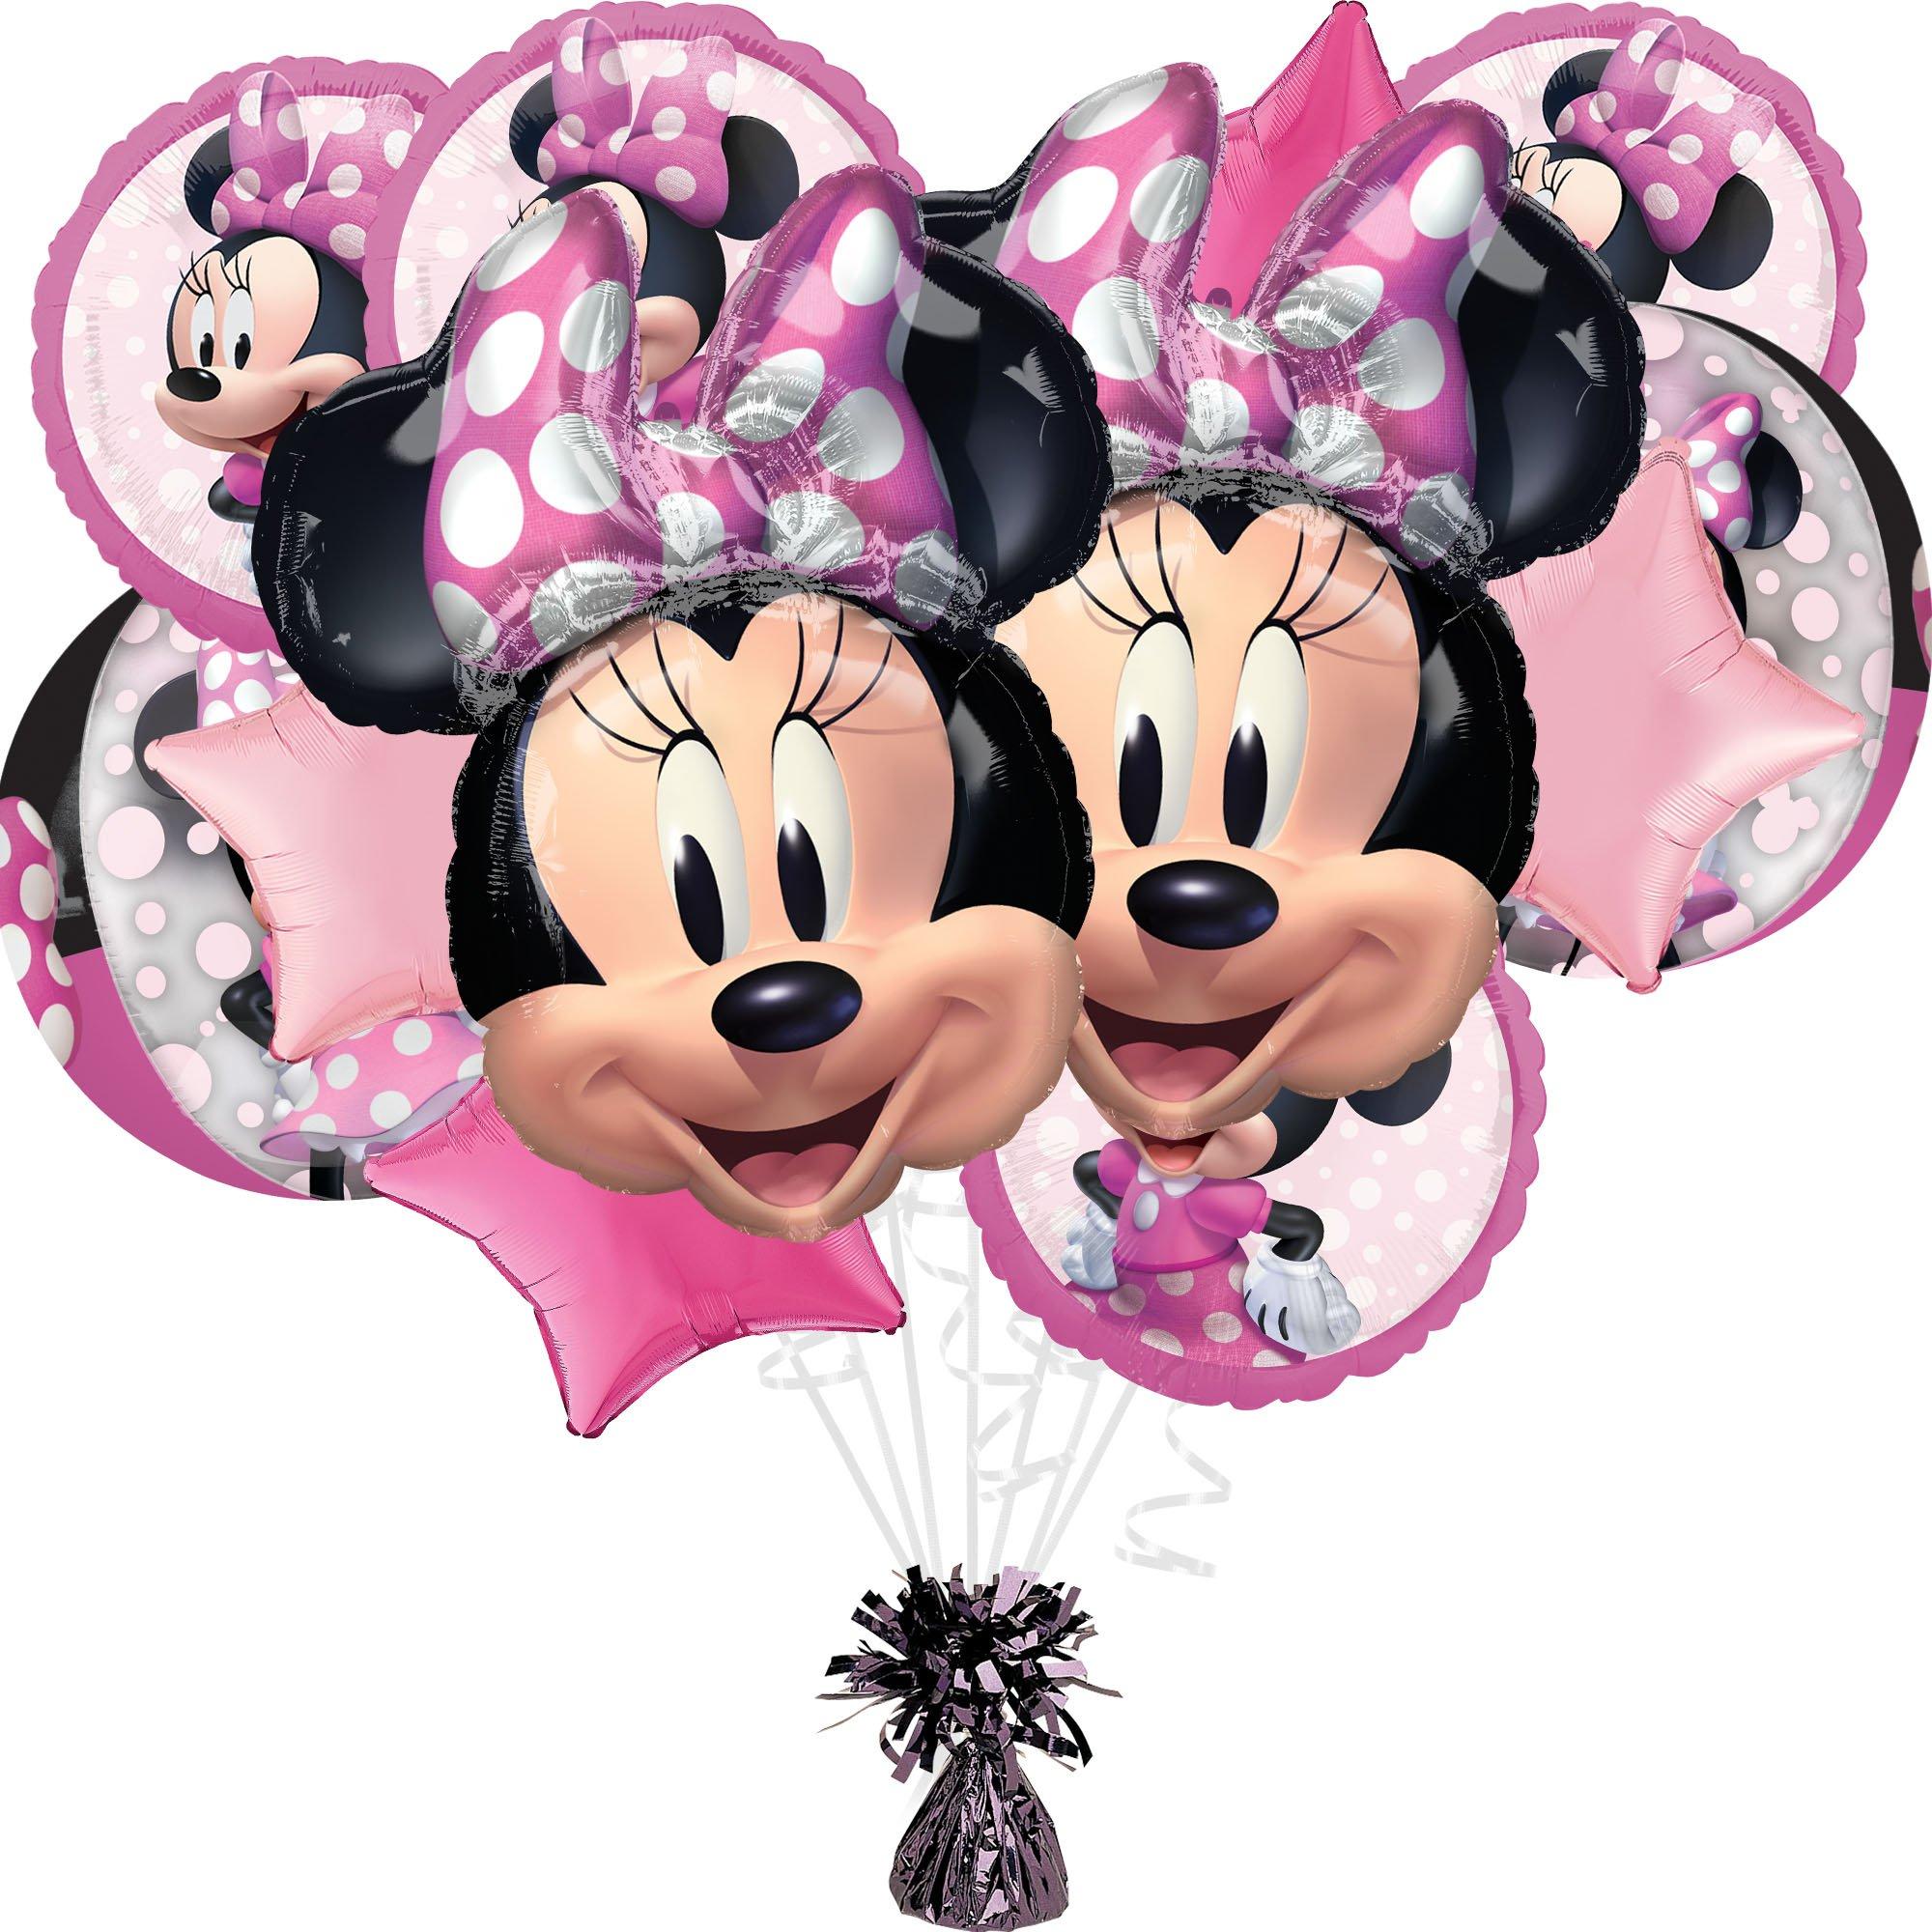 Minnie Mouse Theme Name Board (1 LEVEL) - The Brat Shack Party Store